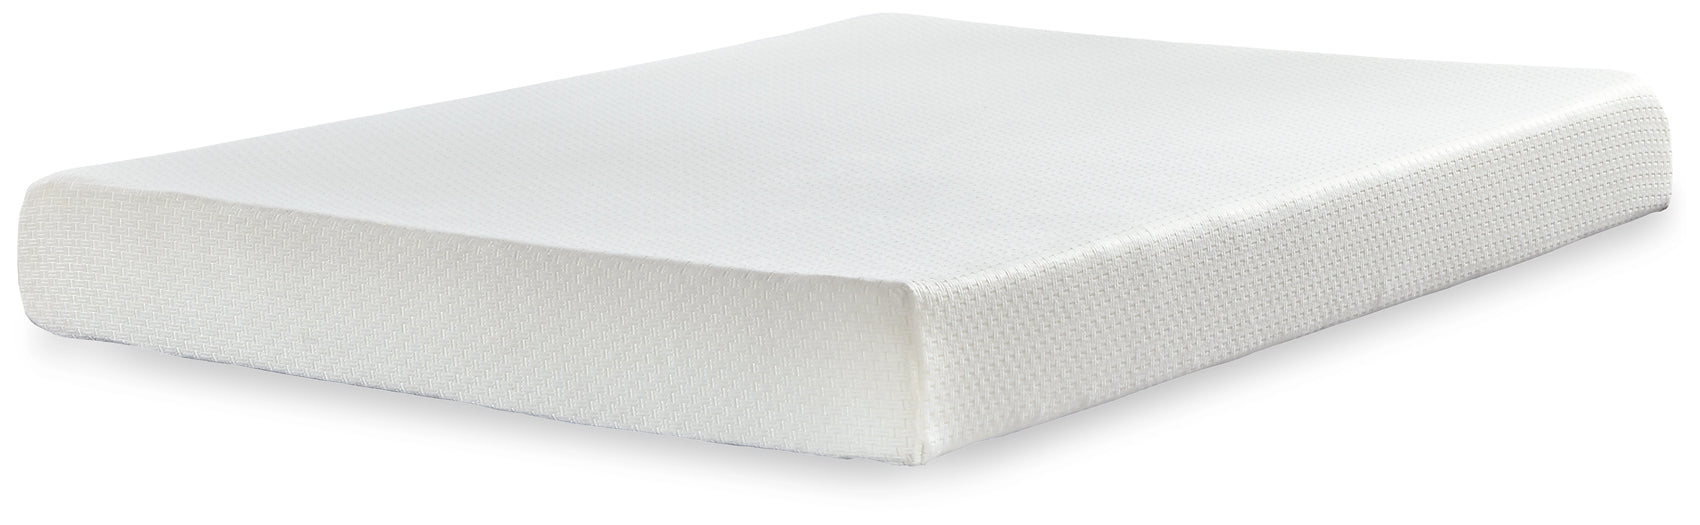 Chime 8 Inch Memory Foam Mattress with Adjustable Base Rent Wise Rent To Own Jacksonville, Florida